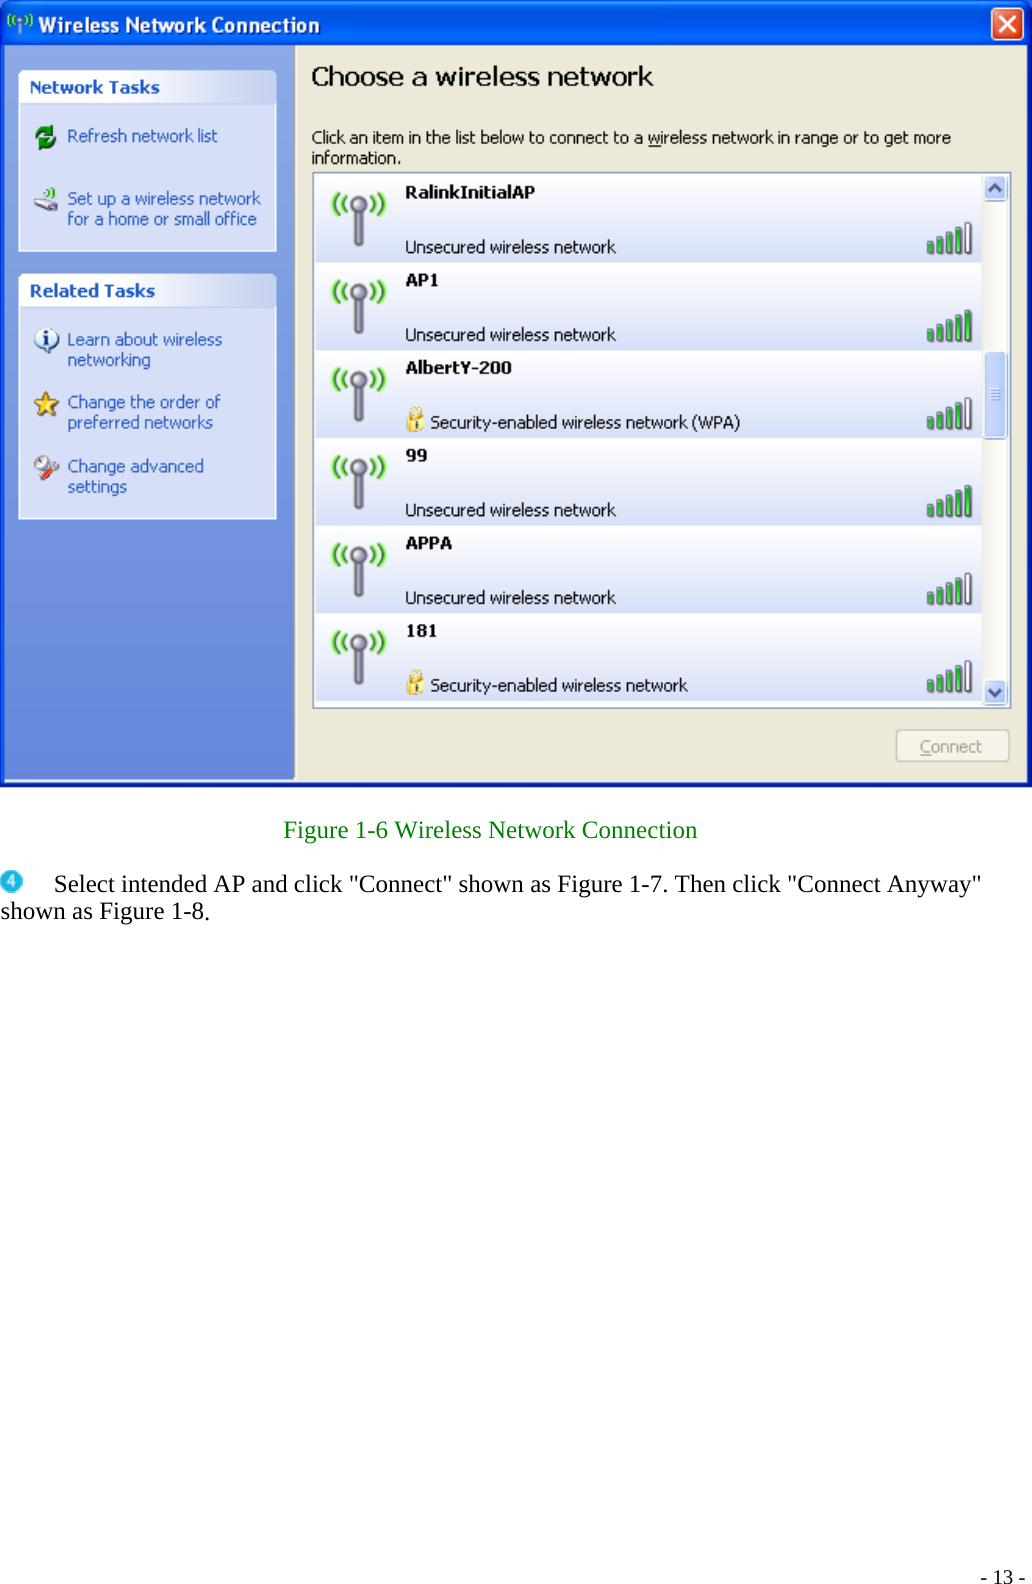    Figure 1-6 Wireless Network Connection     Select intended AP and click &quot;Connect&quot; shown as Figure 1-7. Then click &quot;Connect Anyway&quot; shown as Figure 1-8.    - 13 -